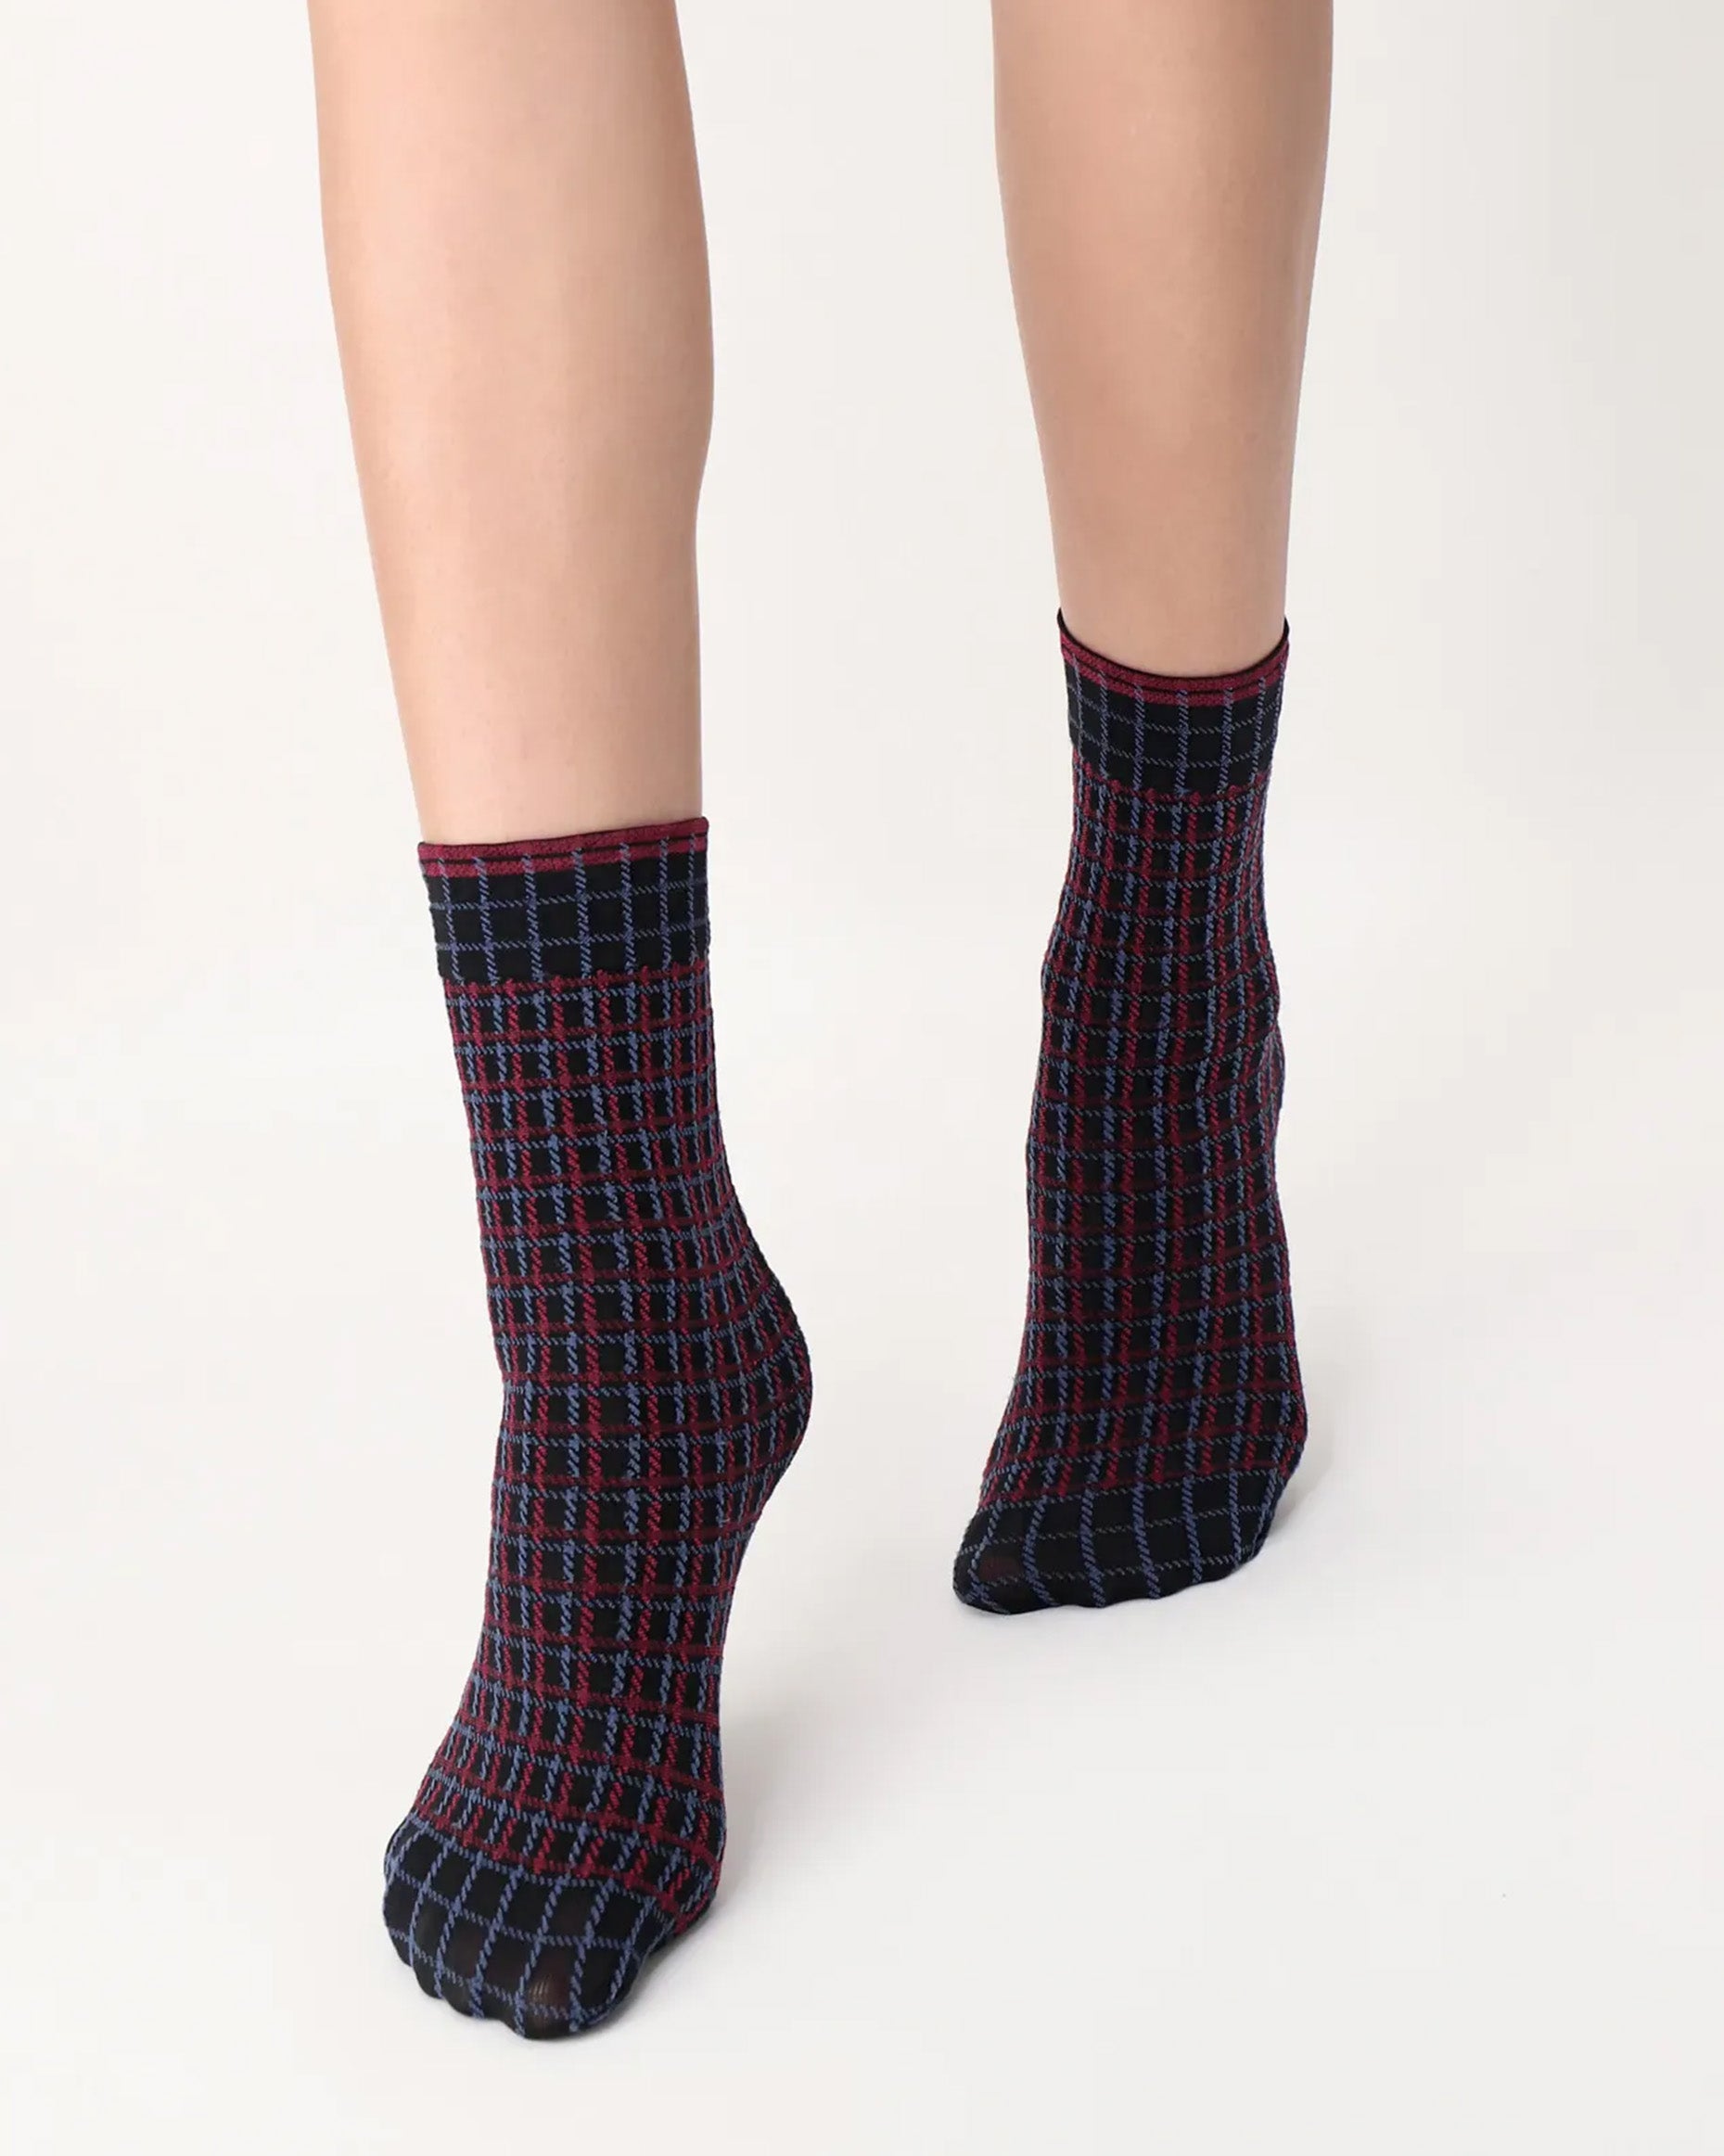 Oroblù Color Check Sock - Dark navy opaque fashion ankle socks with a tartan check style linear pattern in blue and red and deep elasticated comfort cuff.